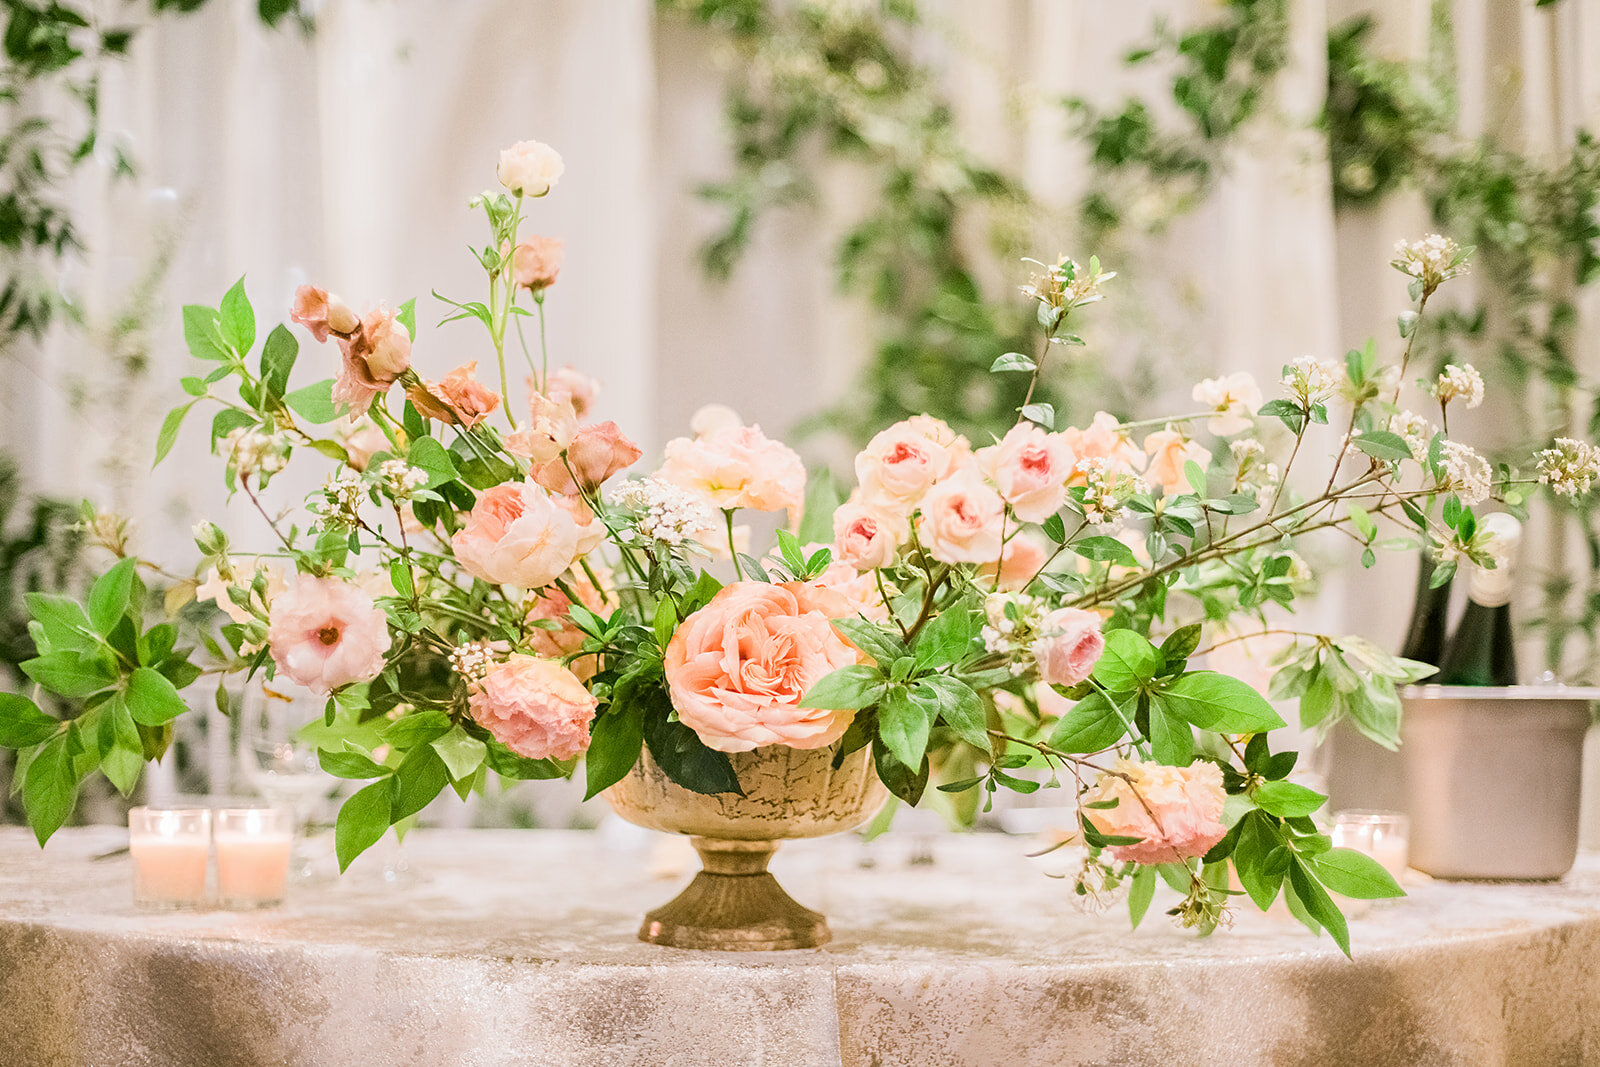 garden-style-intimate-centerpiece-wedding-by-blush-floral-co-houston-texas-photo-by-kaiti-moyers-photography